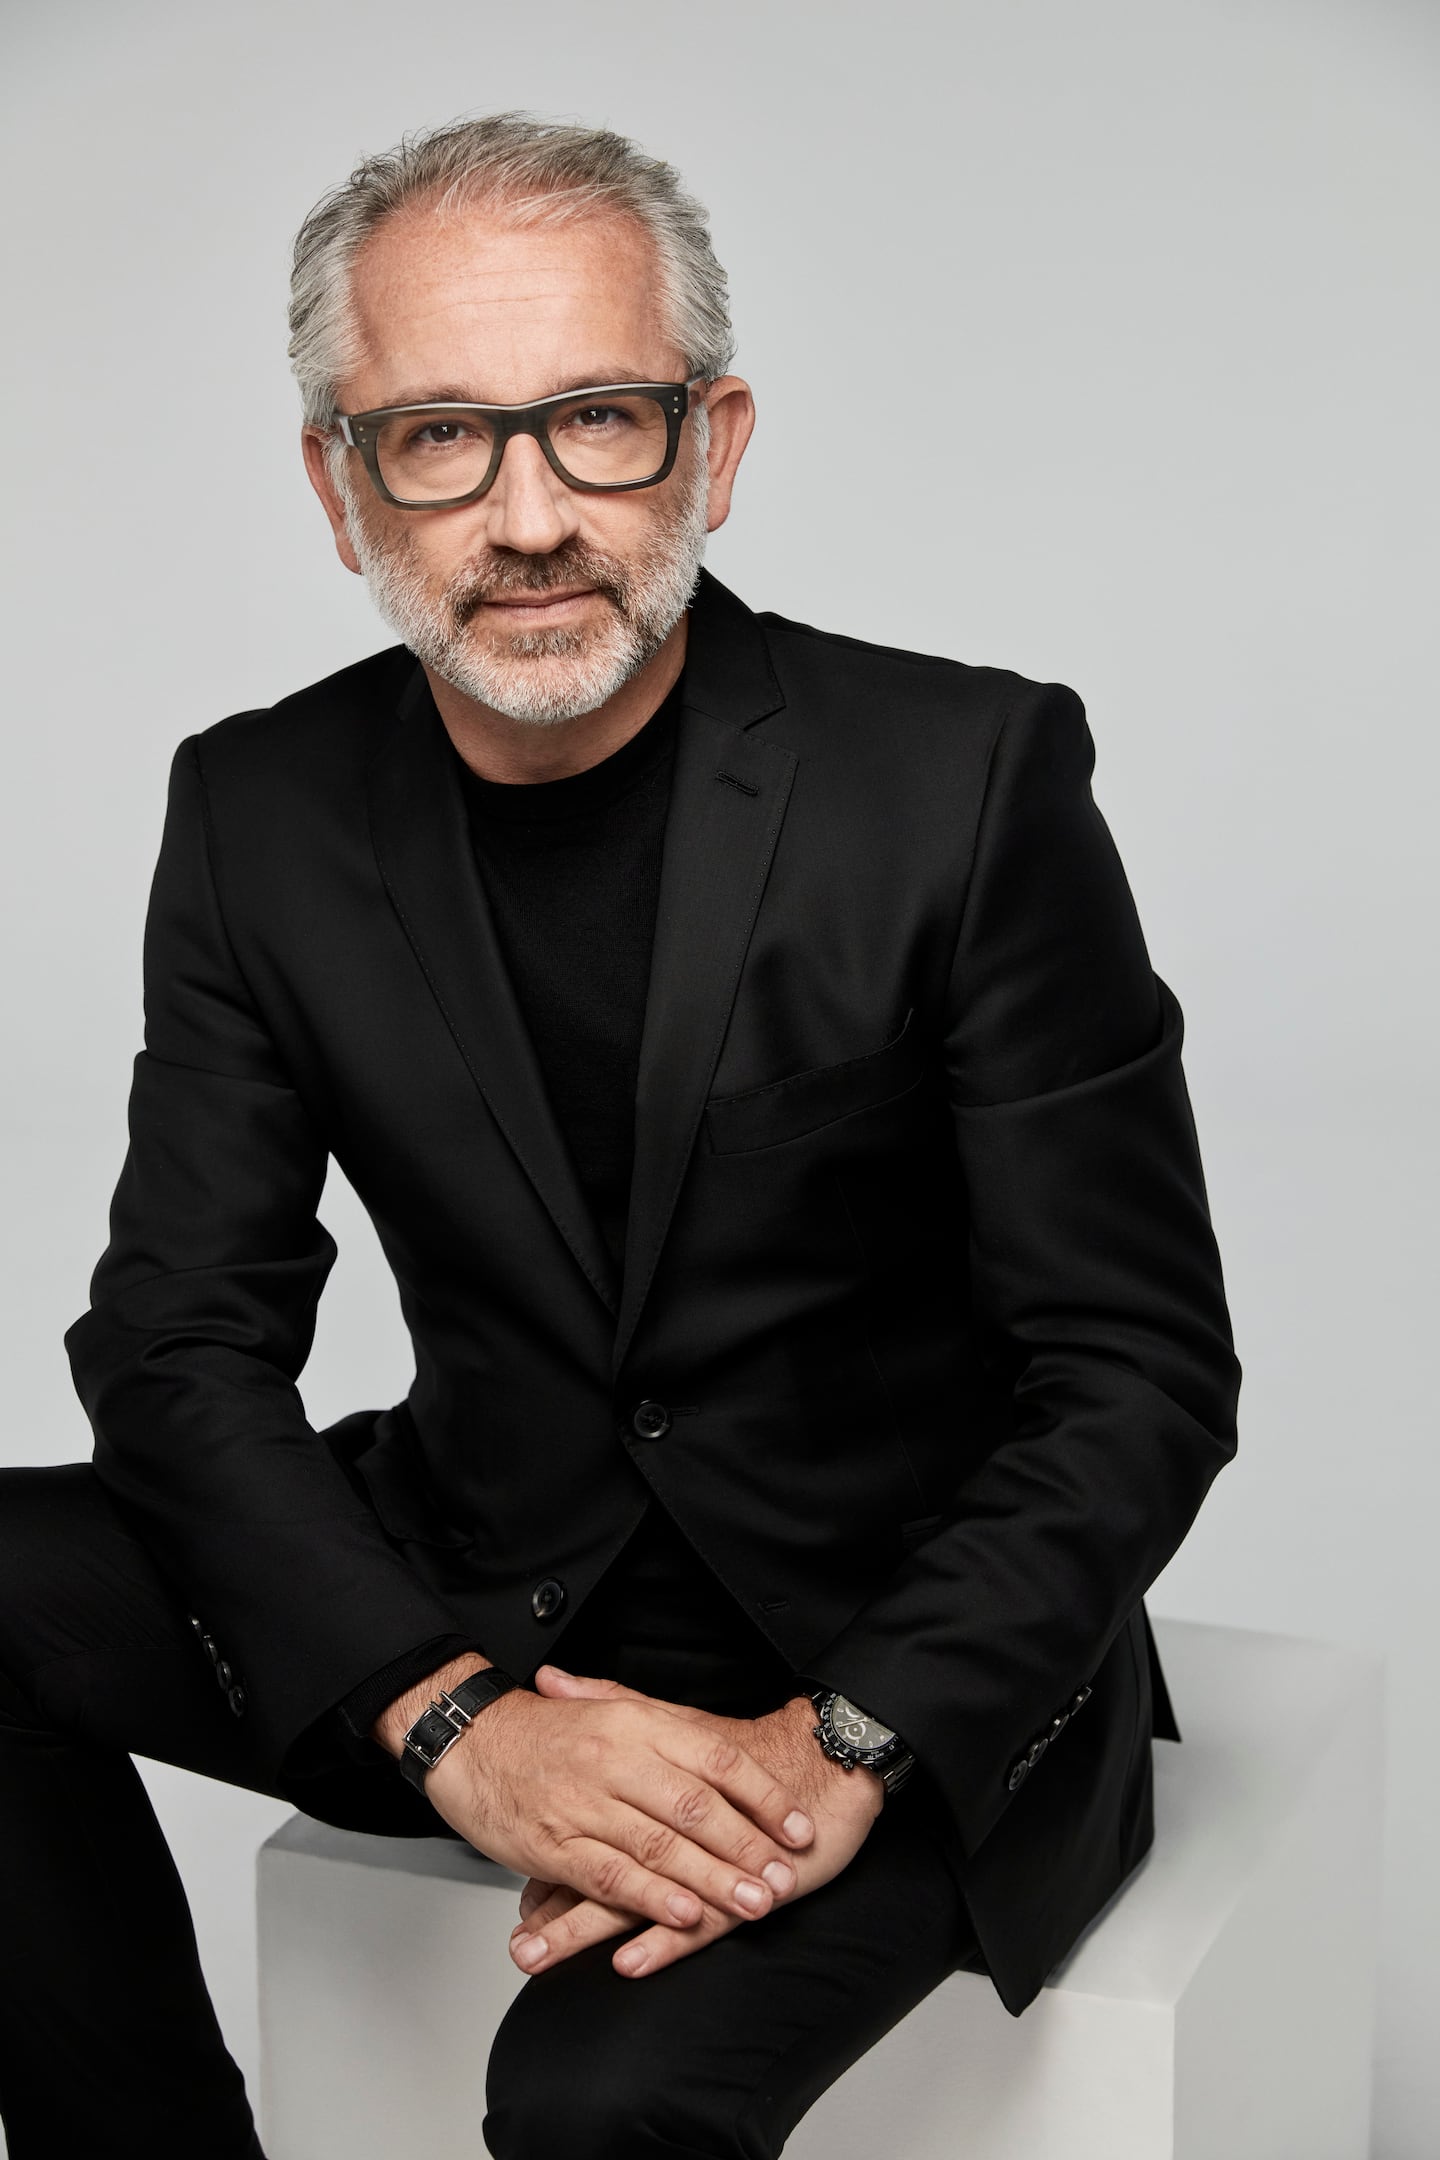 L'Oréal Luxe president Cyril Chapuy has spearheaded several major licence deals with fashion brands.